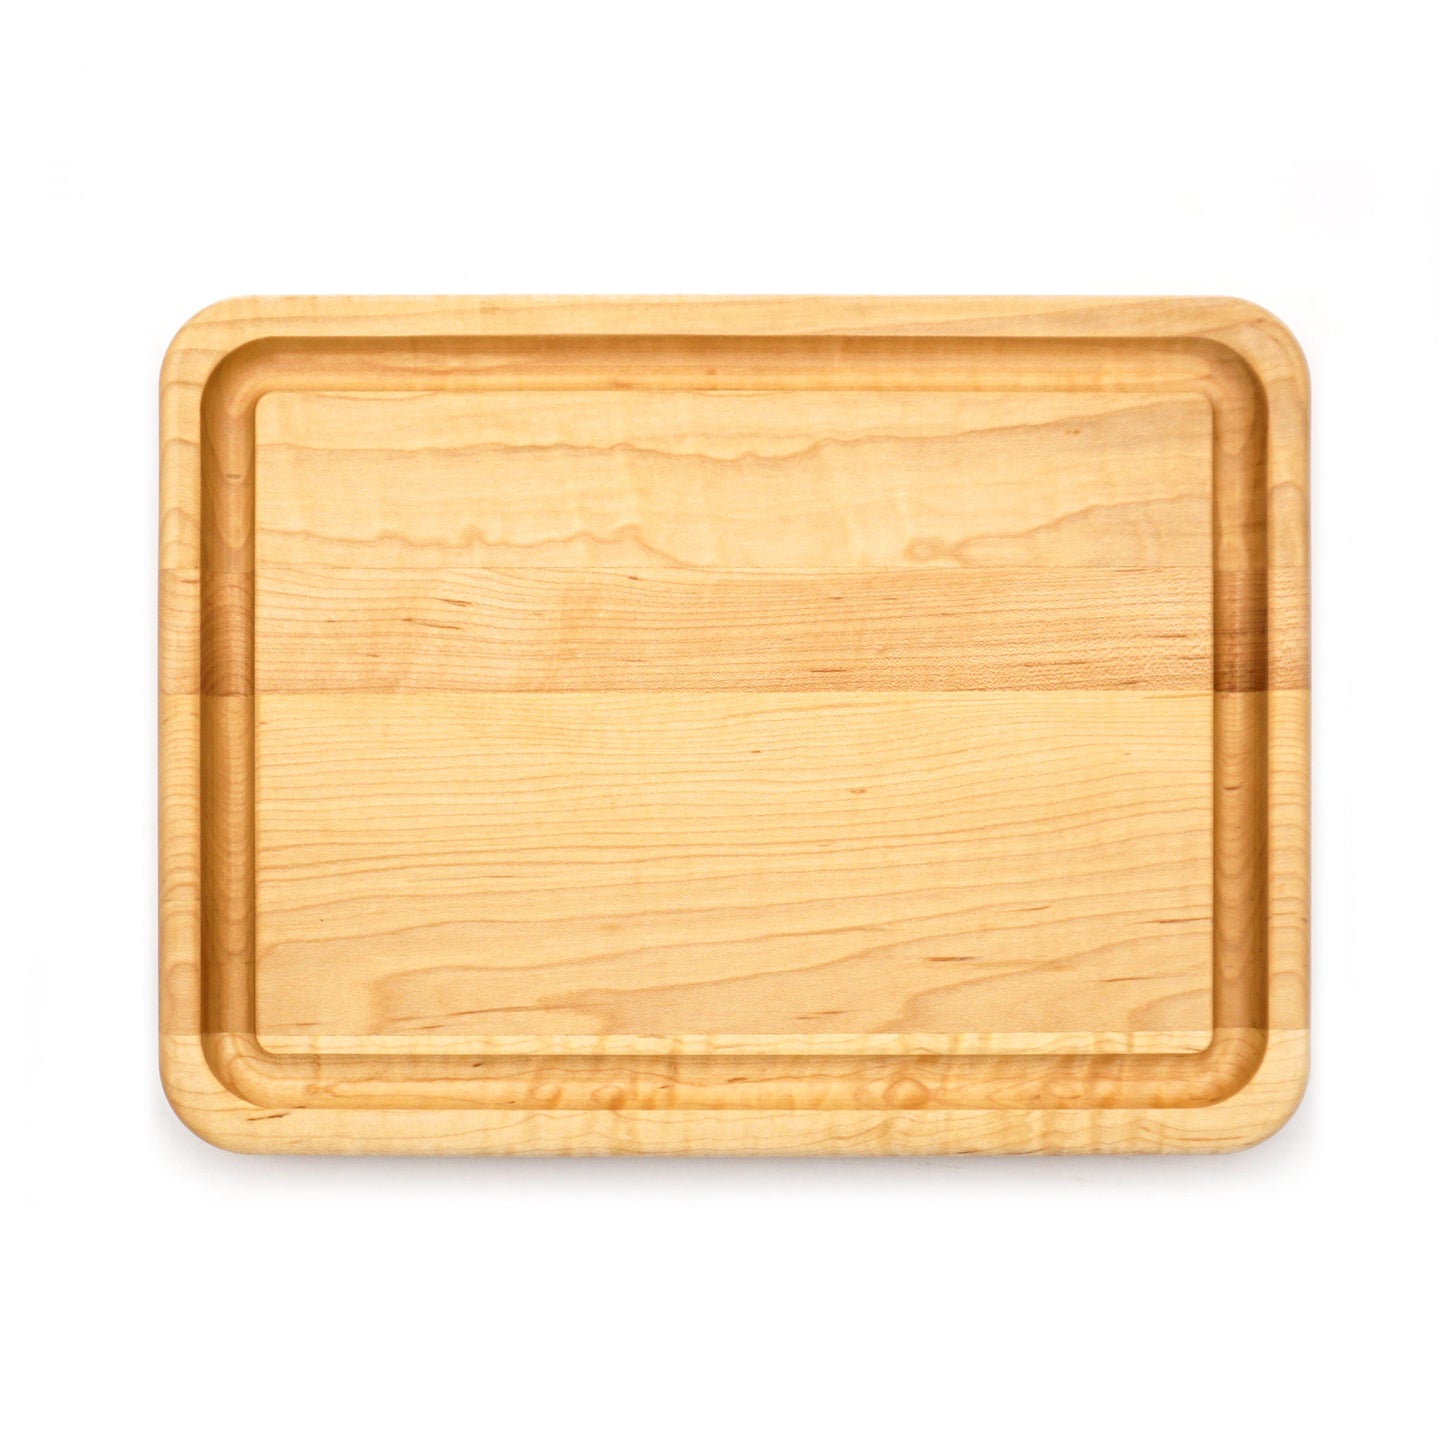 Maple Carving Board-12" x 9"